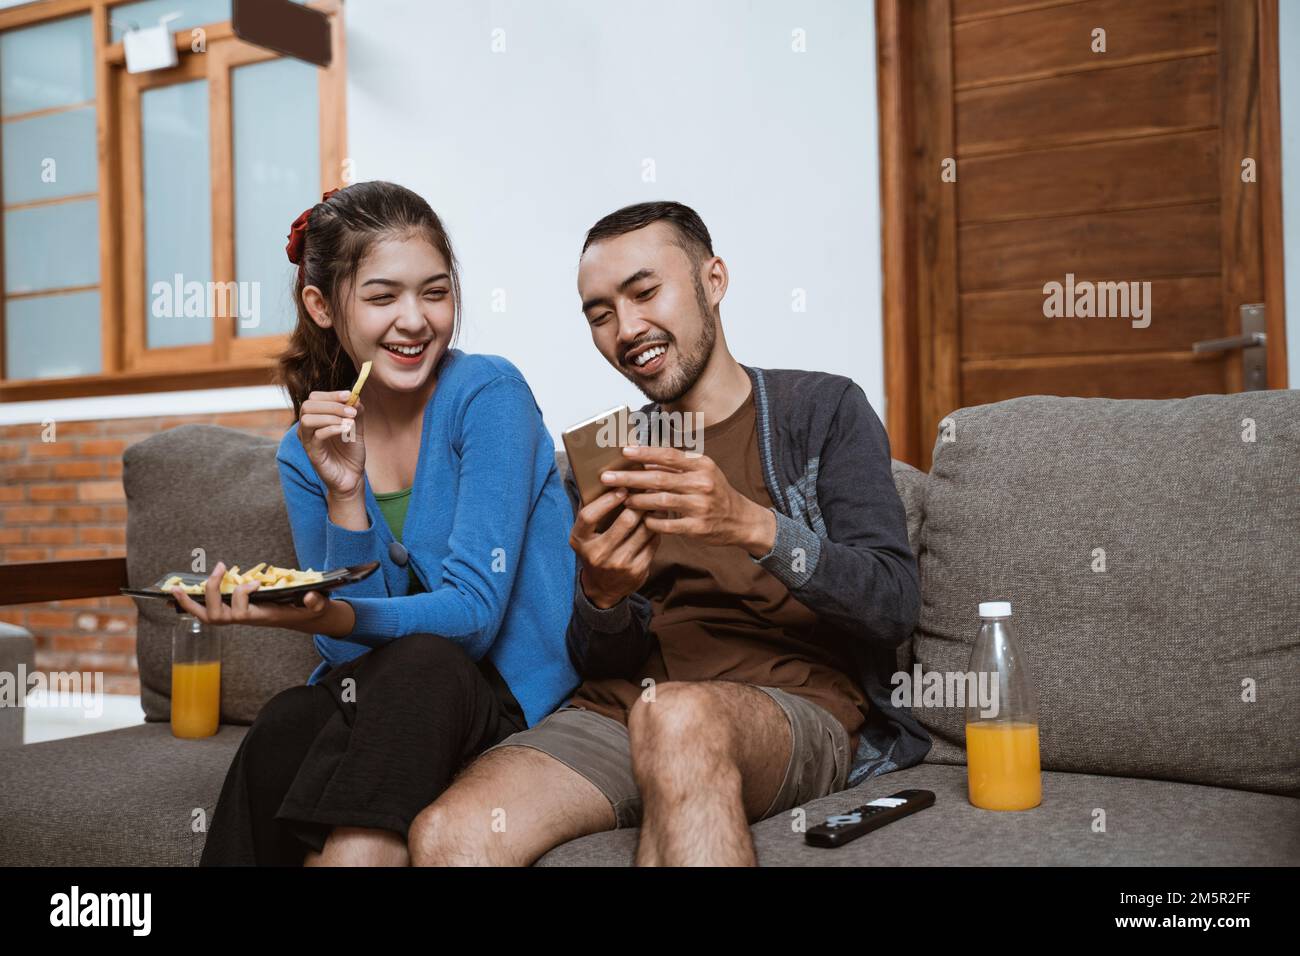 girl laughs as boyfriend shows phone while sitting on sofa Stock Photo